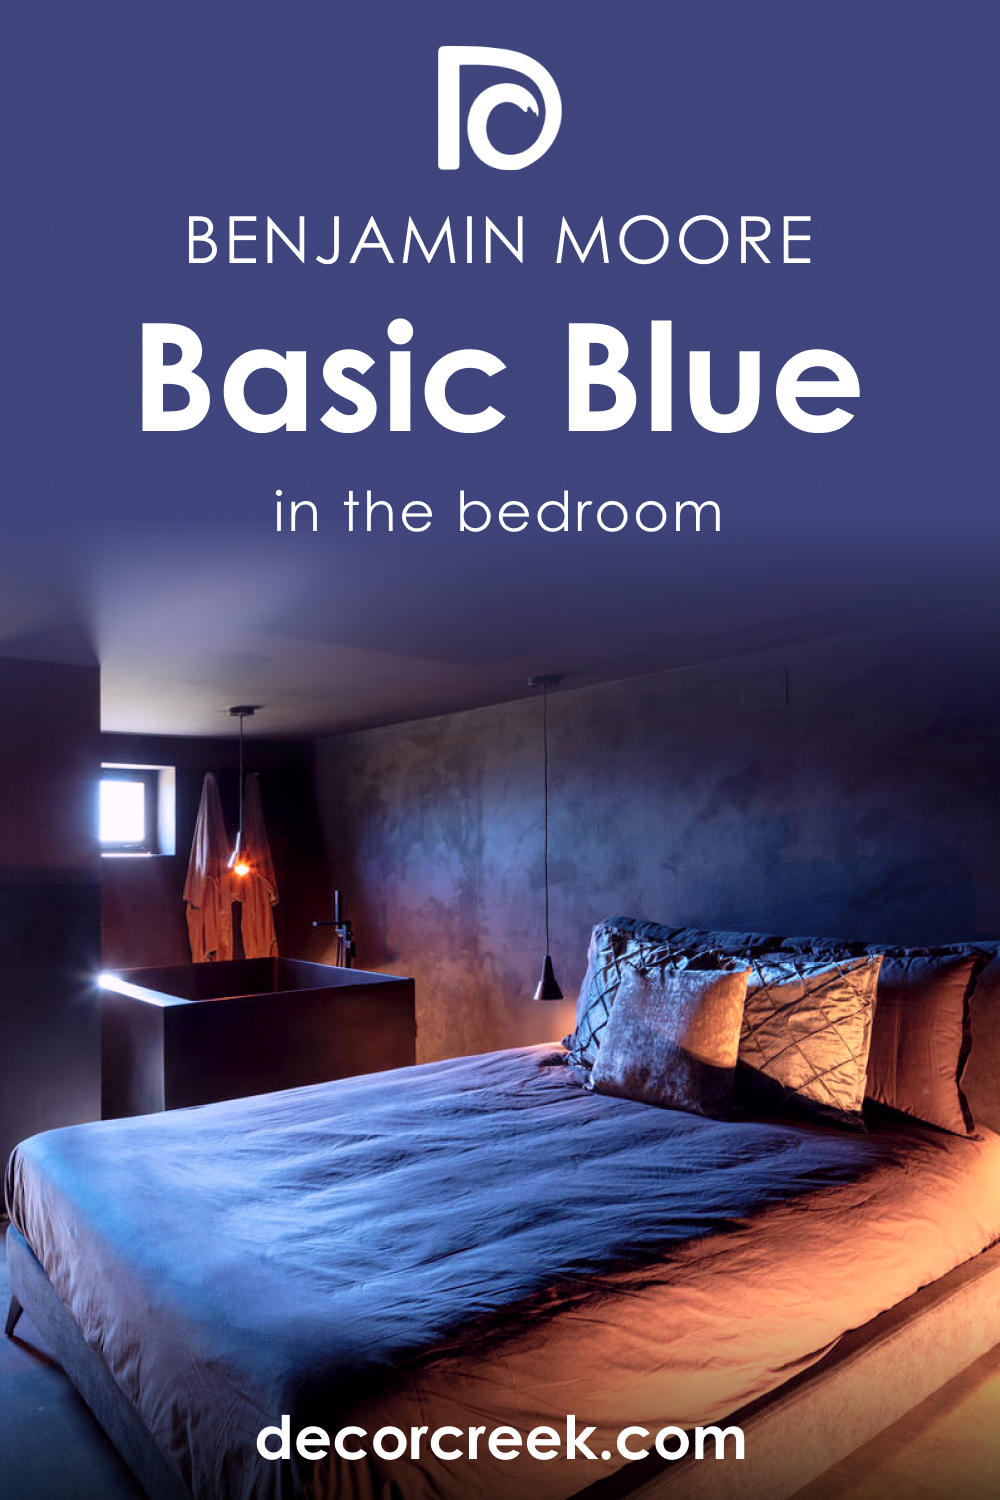 How to Use Basic Blue CC-968 in the Bedroom?